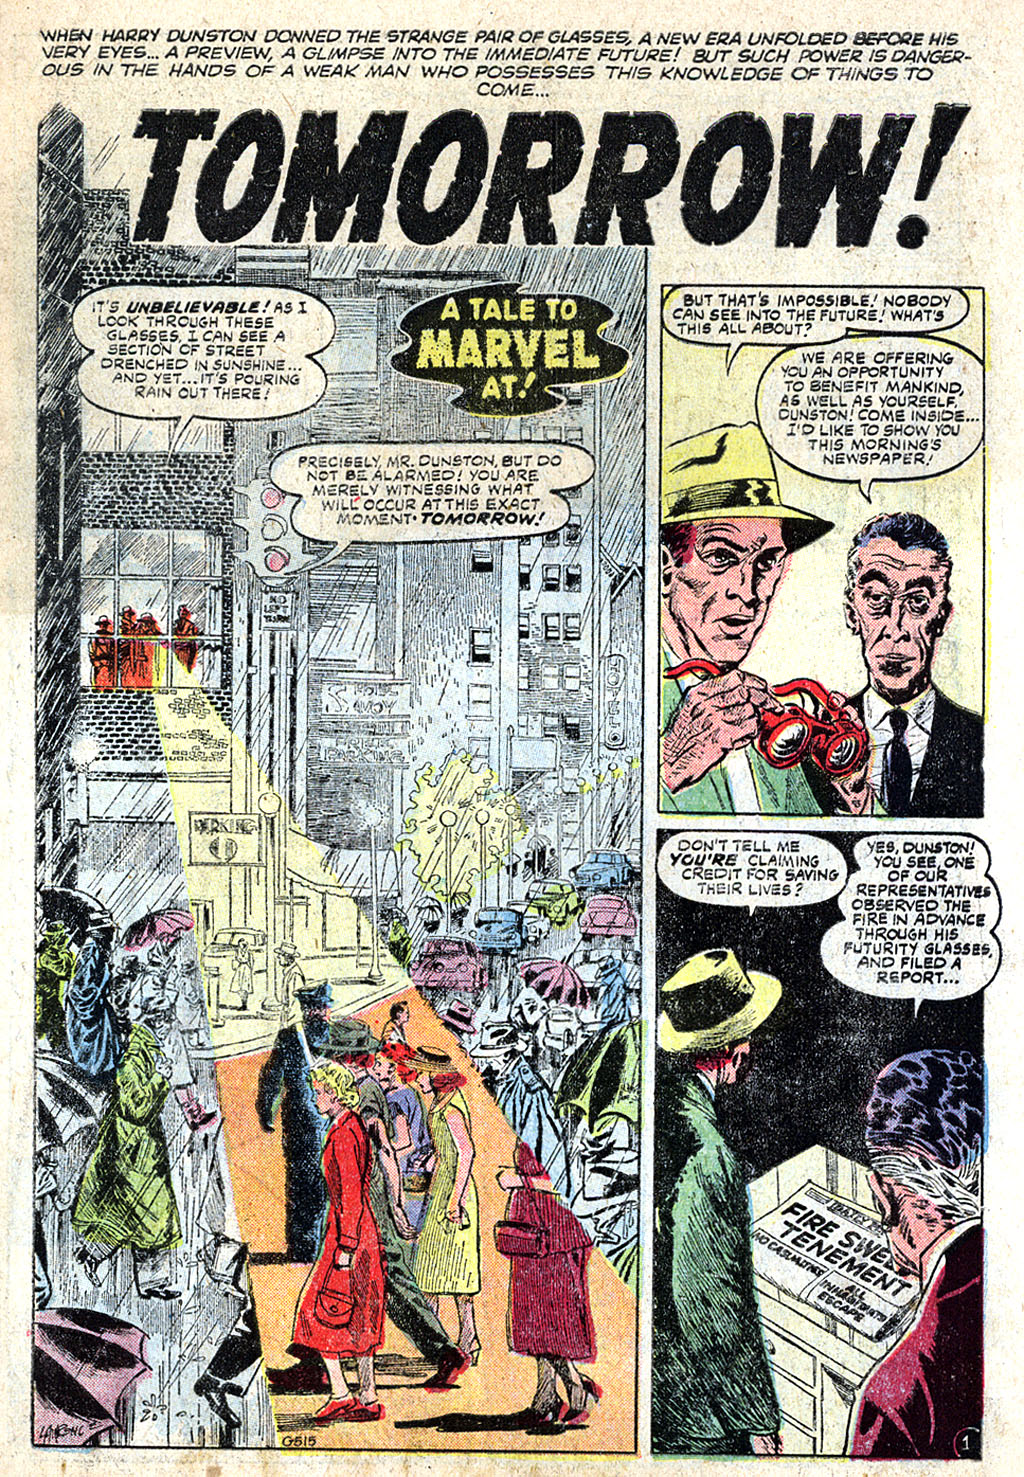 Marvel Tales (1949) 138 Page 2